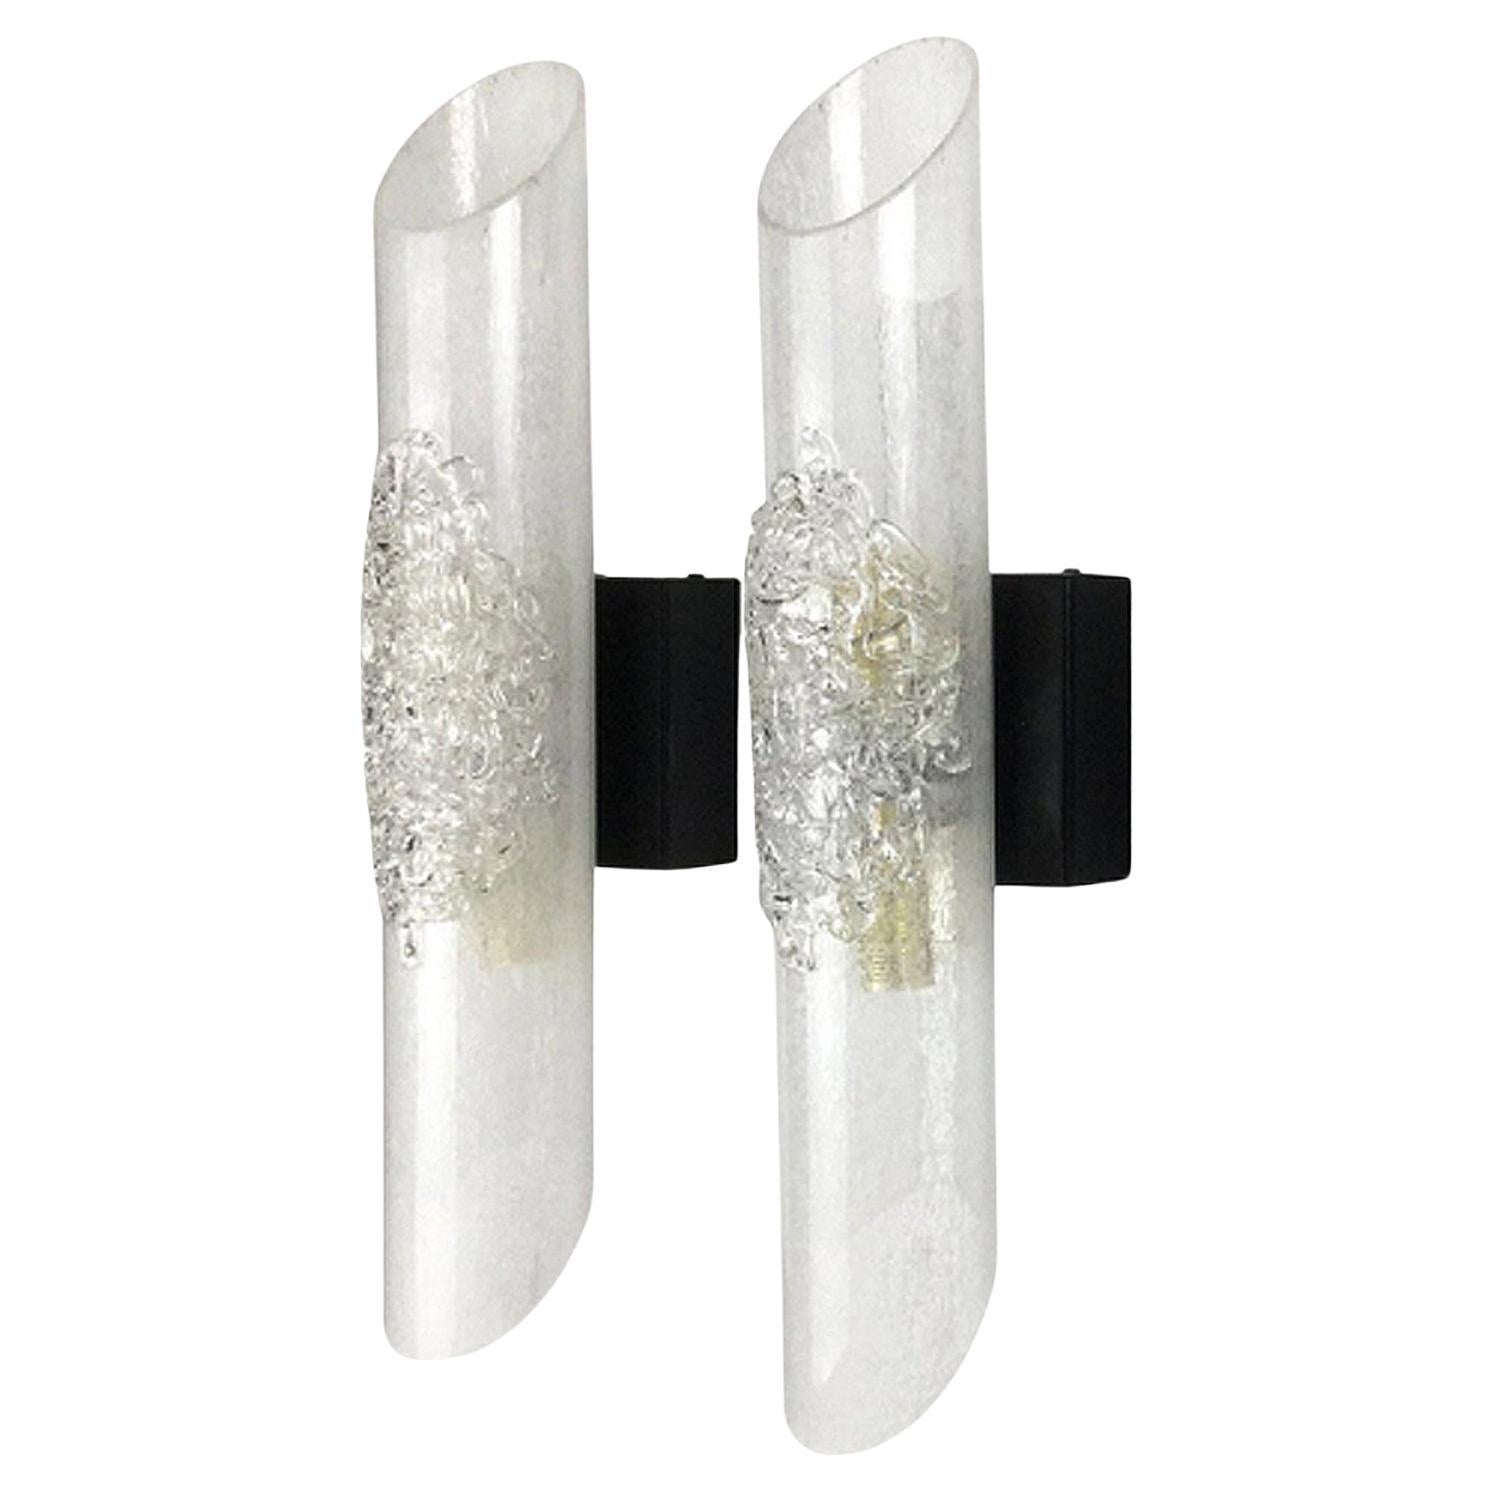 Murano pair of glass wall lights / Sconces, Mazzega, Italy, c. 1970s For Sale